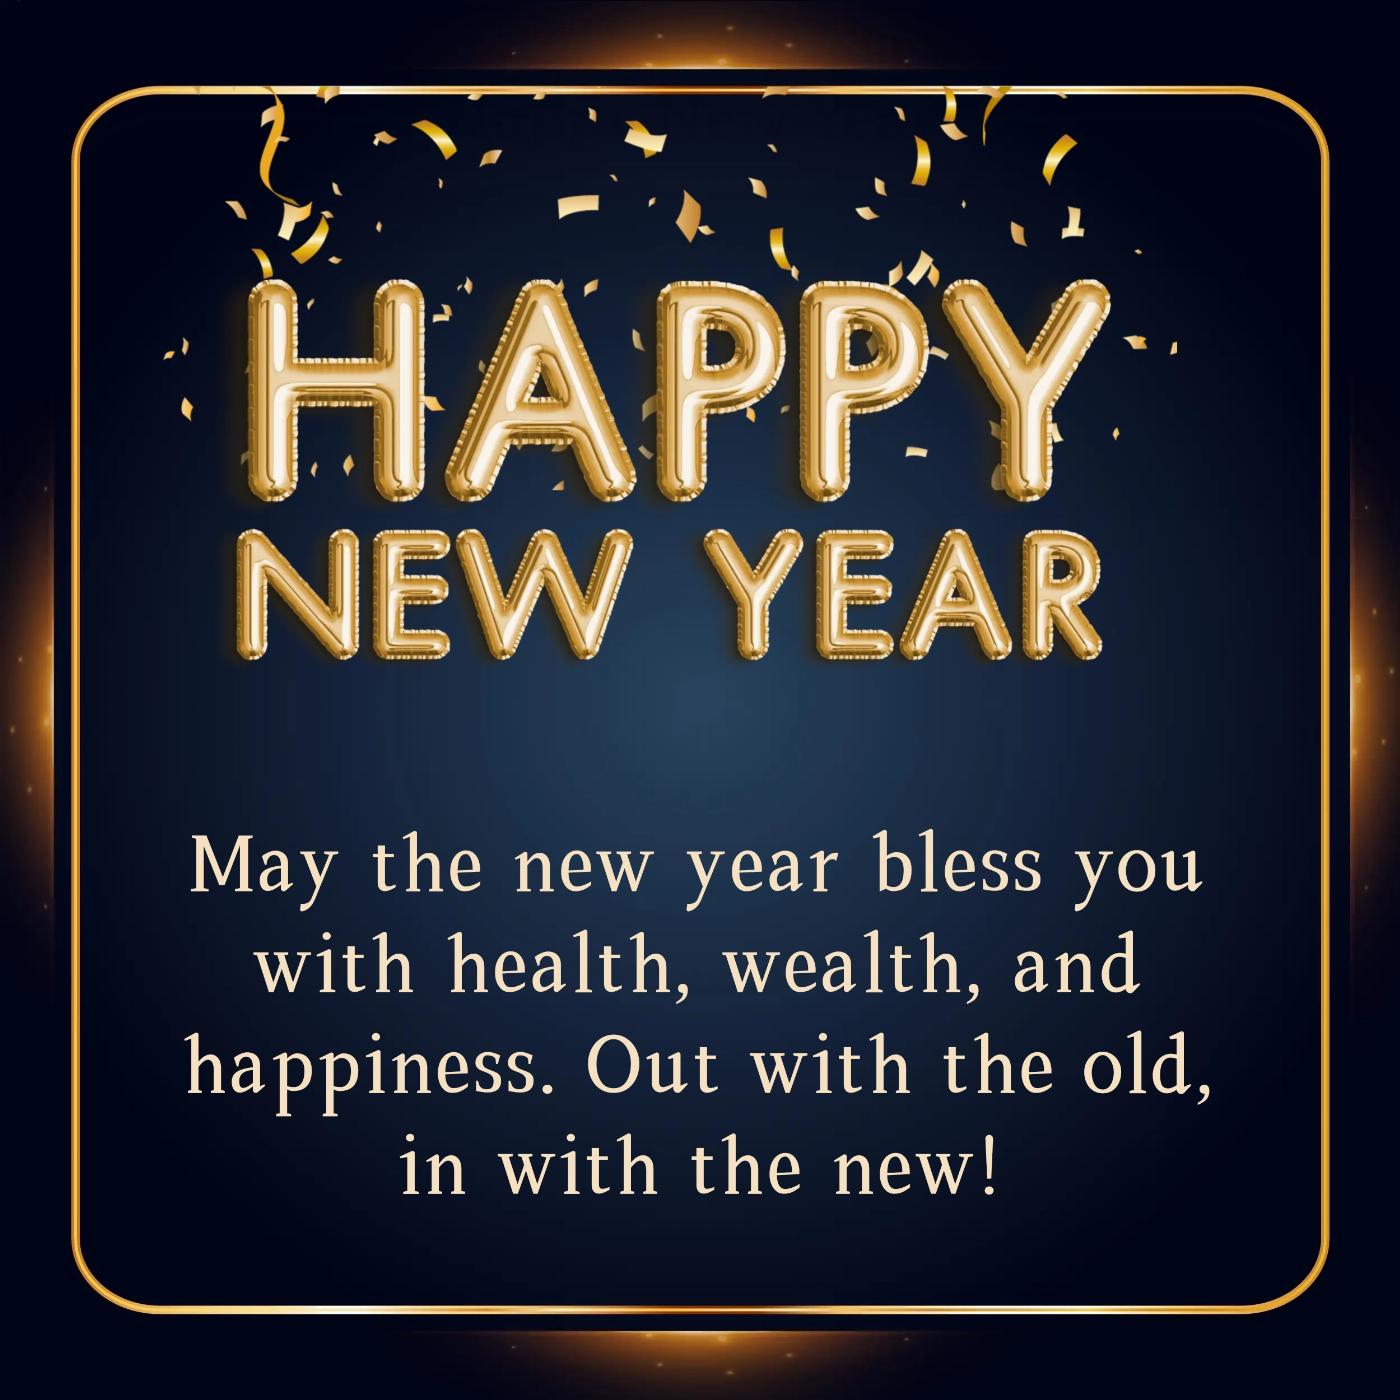 May the new year bless you with health wealth and happiness